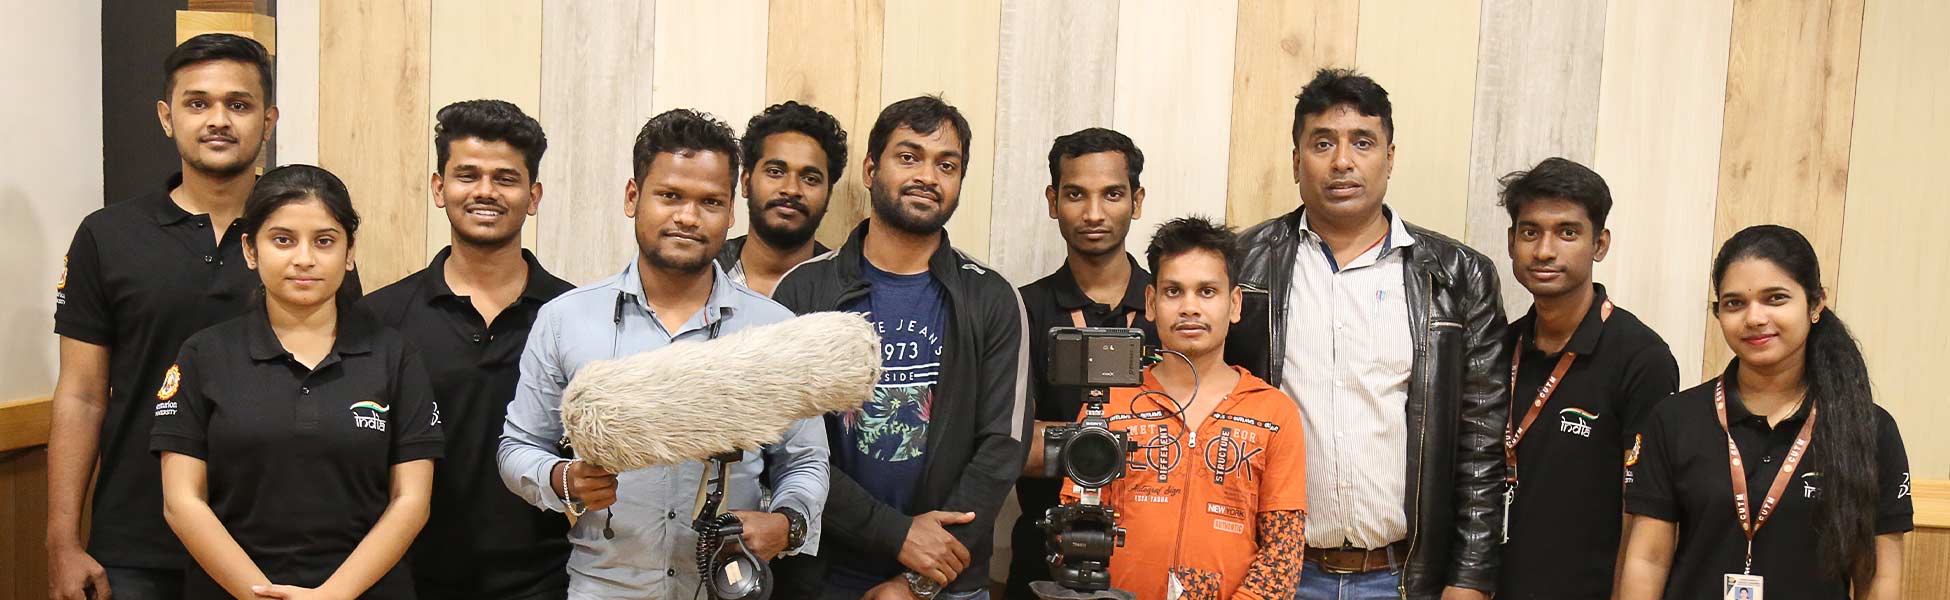 documentary film production services in india, documentary film production services in Delhi, documentary video production services in india, documentary video production services in Delhi, tv documentary production services in india, tv documentary production services in delhi, documentary production services in india, documentary production services in delhi